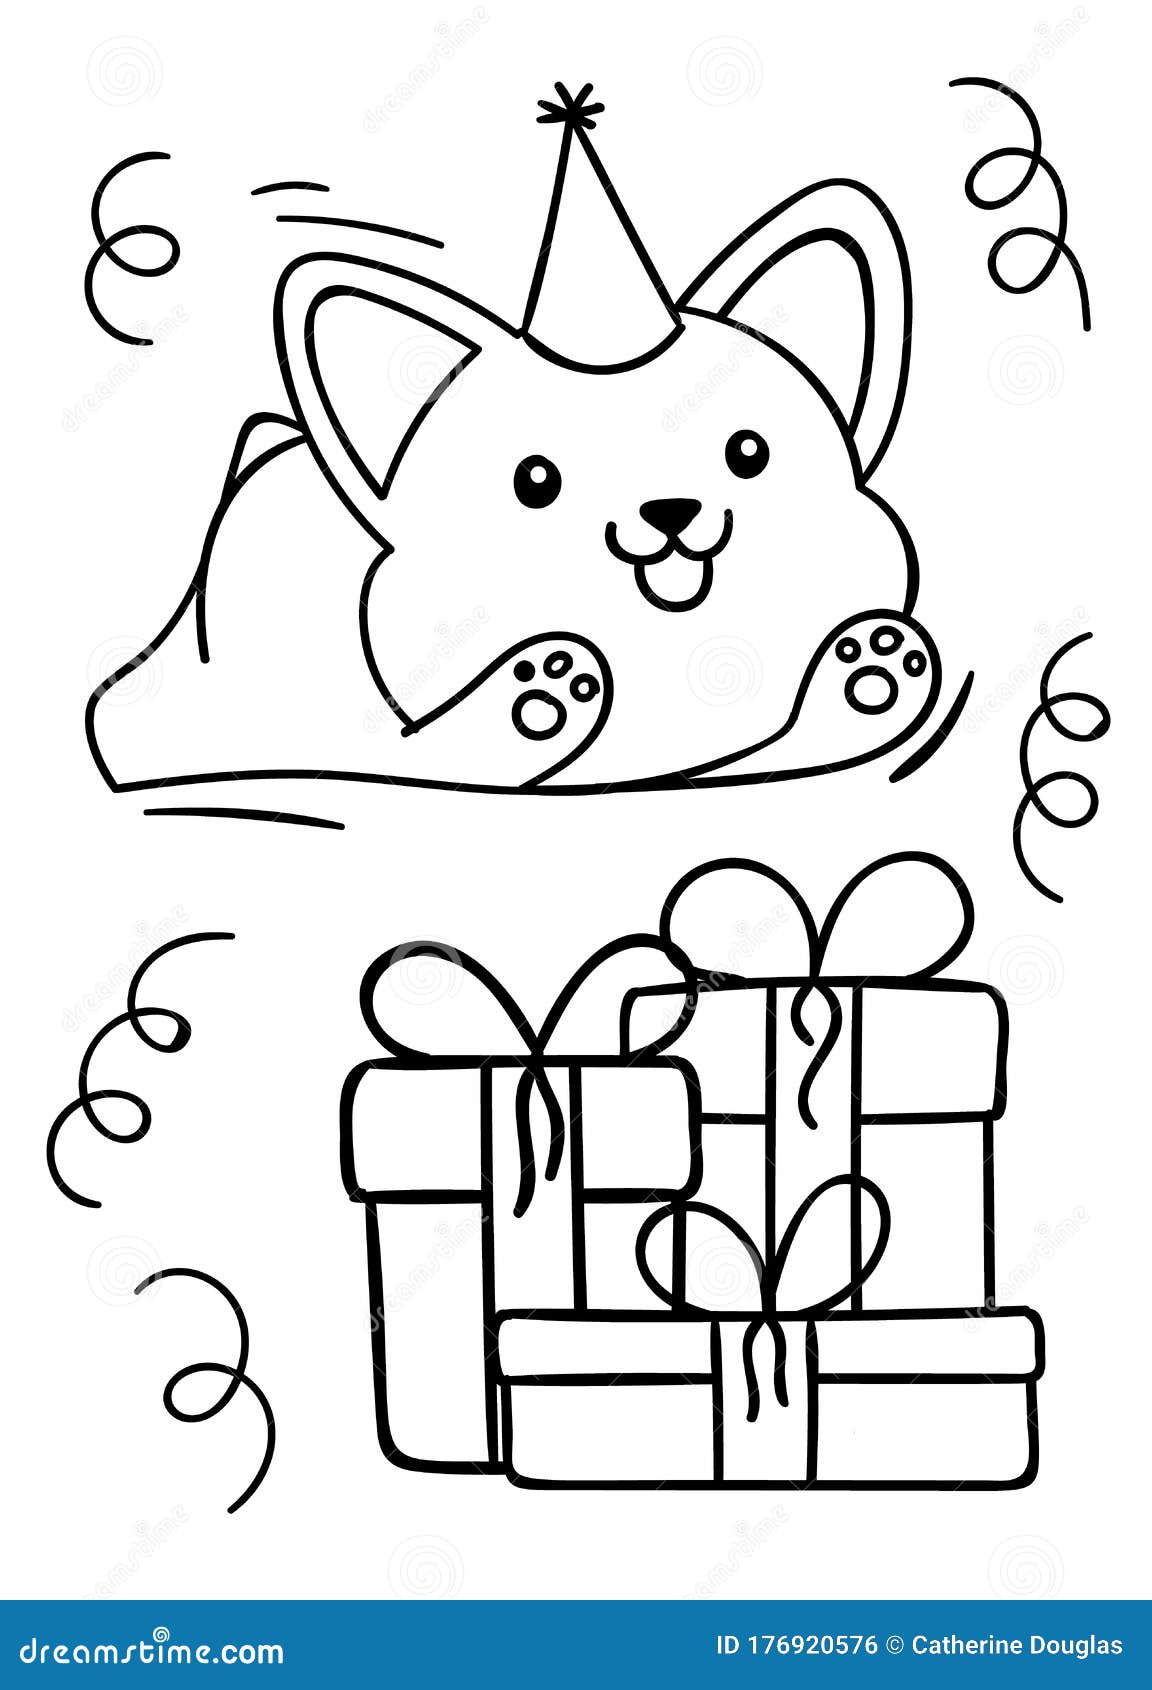 Coloring Pages, Black and White, Happy Birthday, Cute Kawaii Hand ...